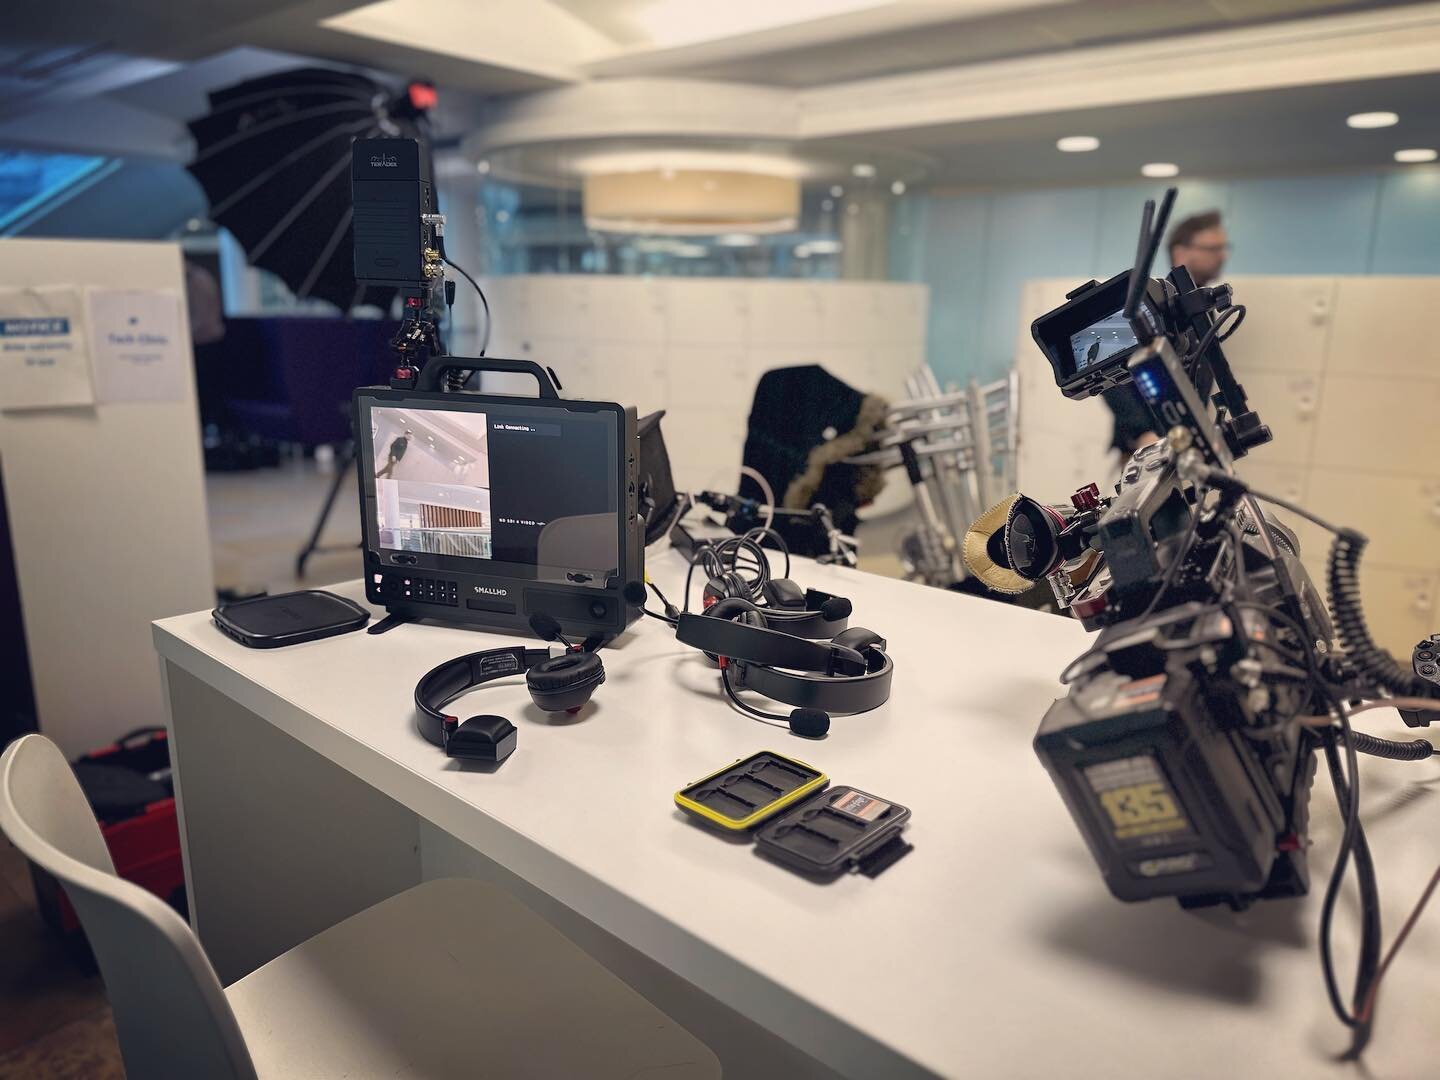 #smallhd cine 13 earning its keep during this multi-cam shoot at Heathrow Airport giving our director eyes on all 3 cameras thanks to its built in multi view functionality.

#dop #cine13 #sonyfx9 #teradek #aputure600d #multicam #easyrig #handheldcame